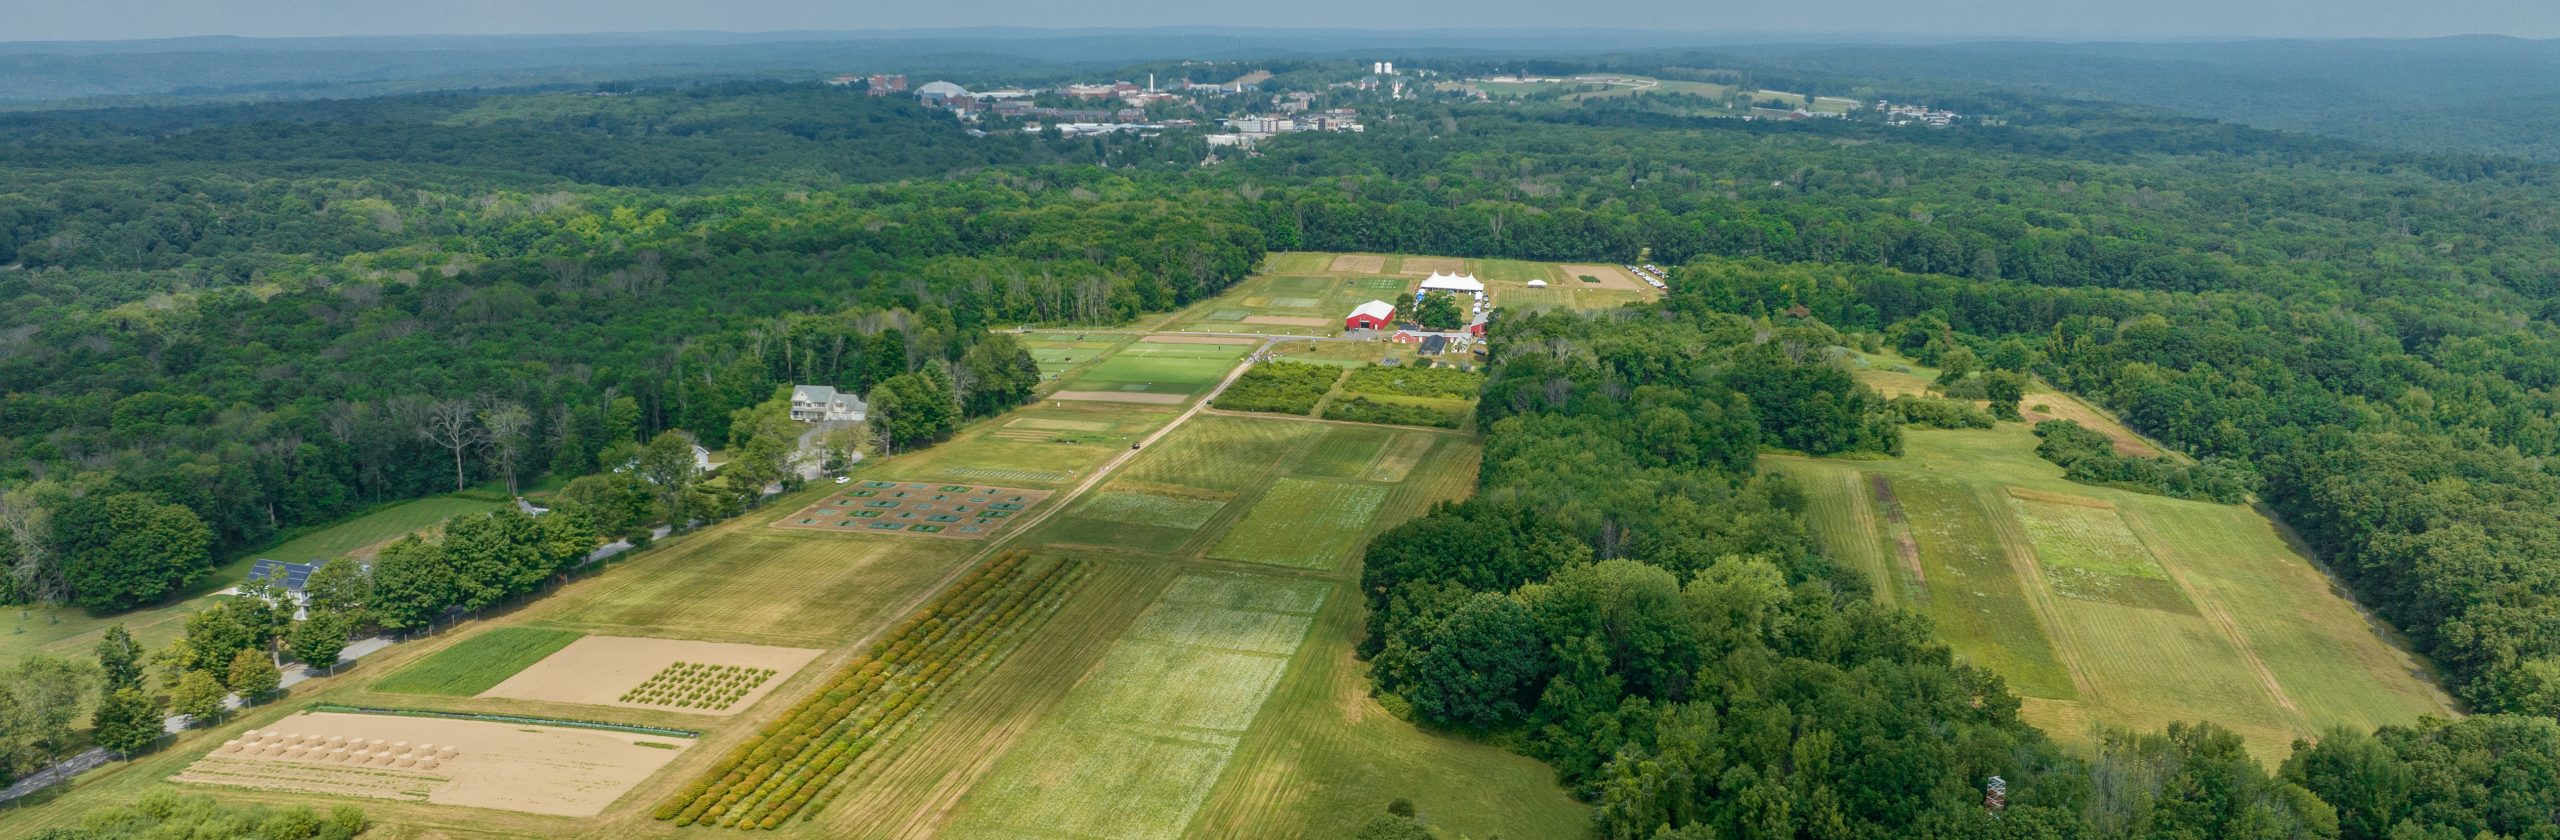 aerial view of research farm